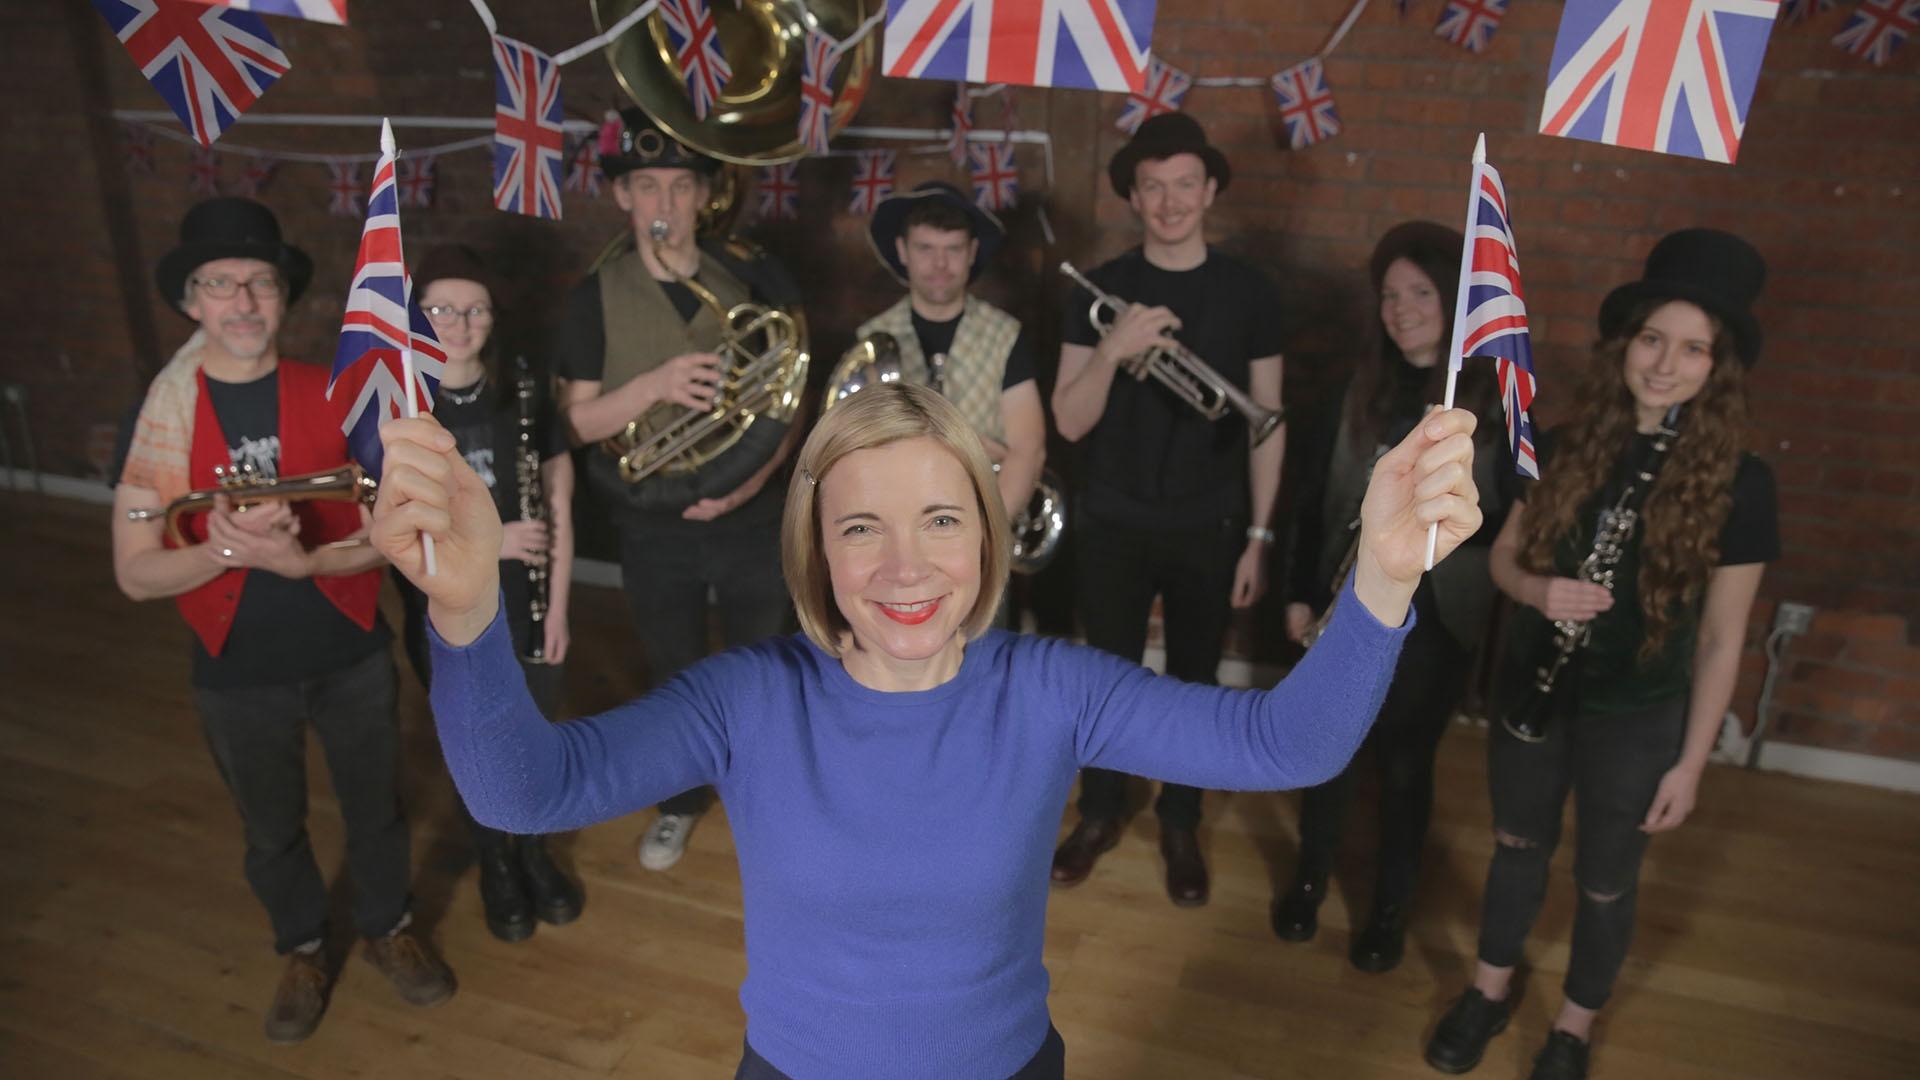 Lucy Worsley with British flags and a band.